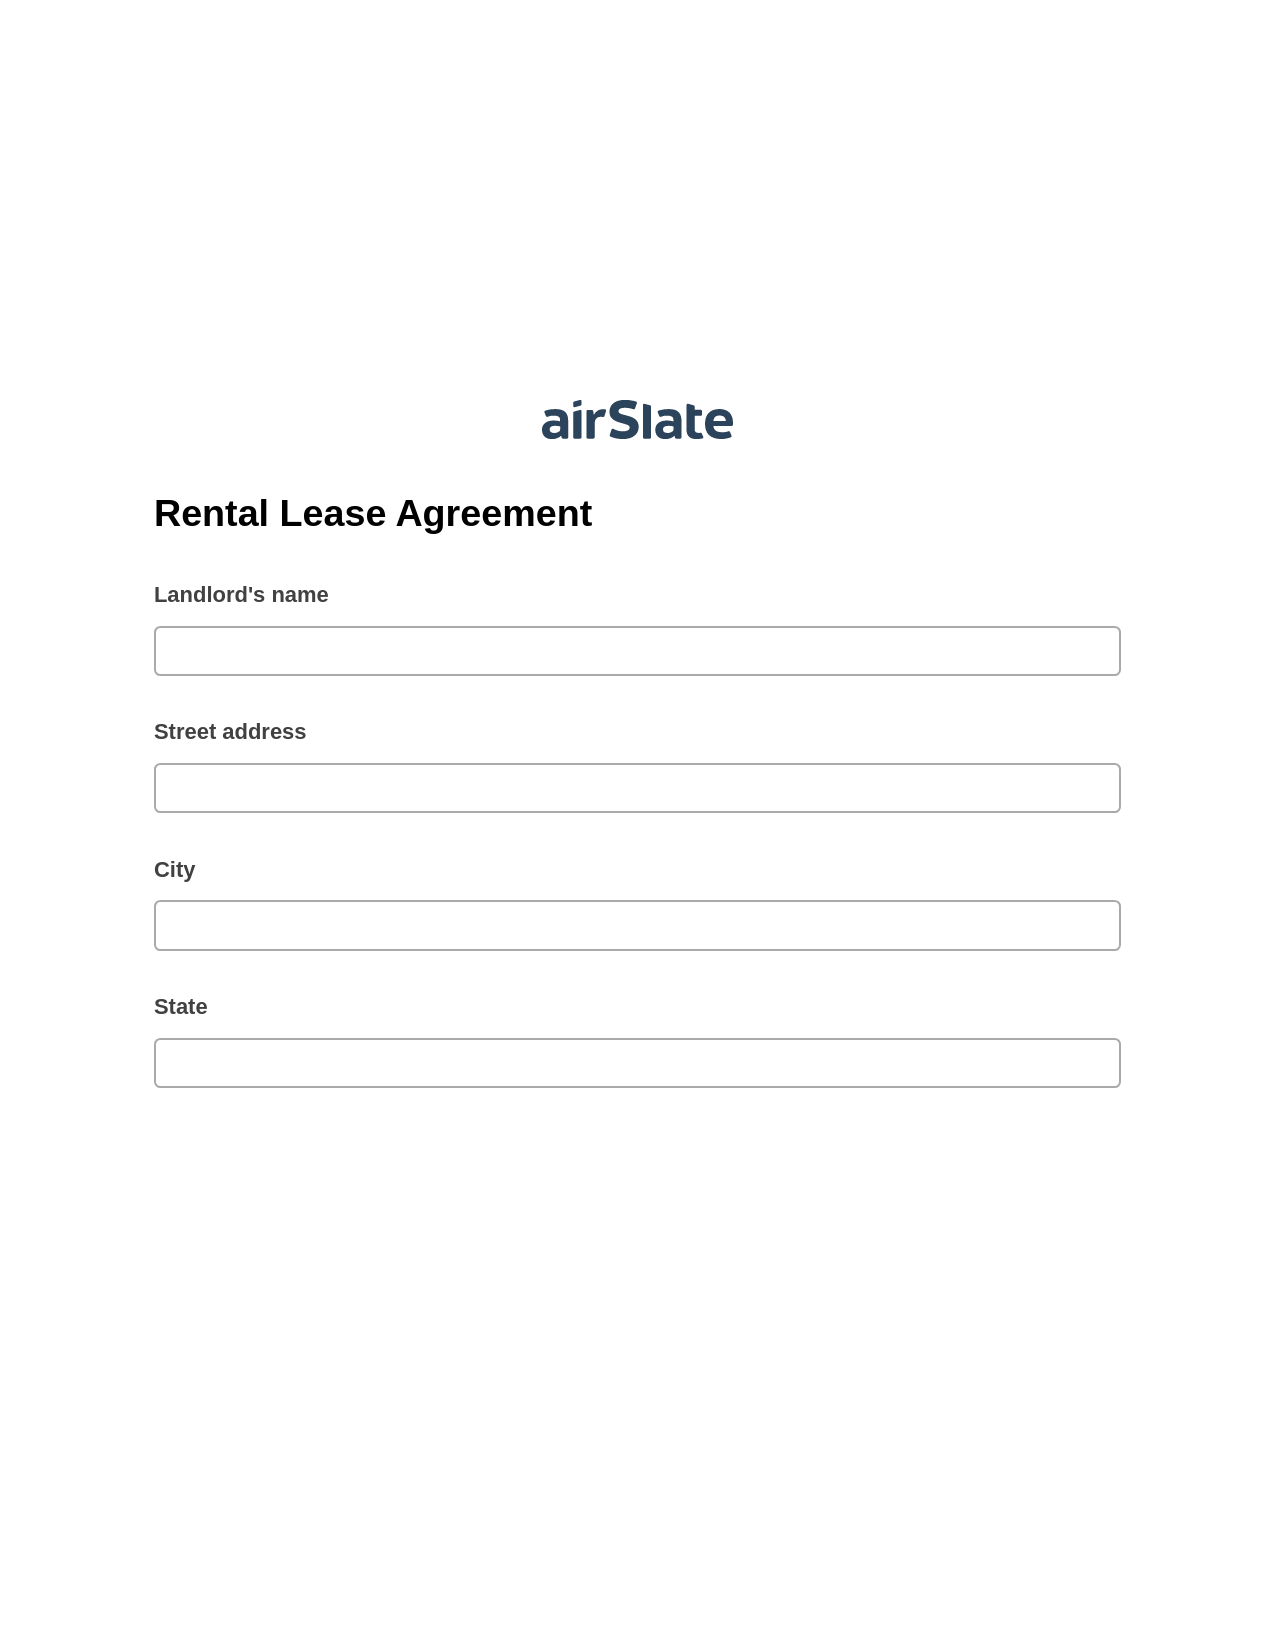 Rental Lease Agreement Pre-fill from Litmos bot, Invoke Salesforce Process Bot, Export to Excel 365 Bot